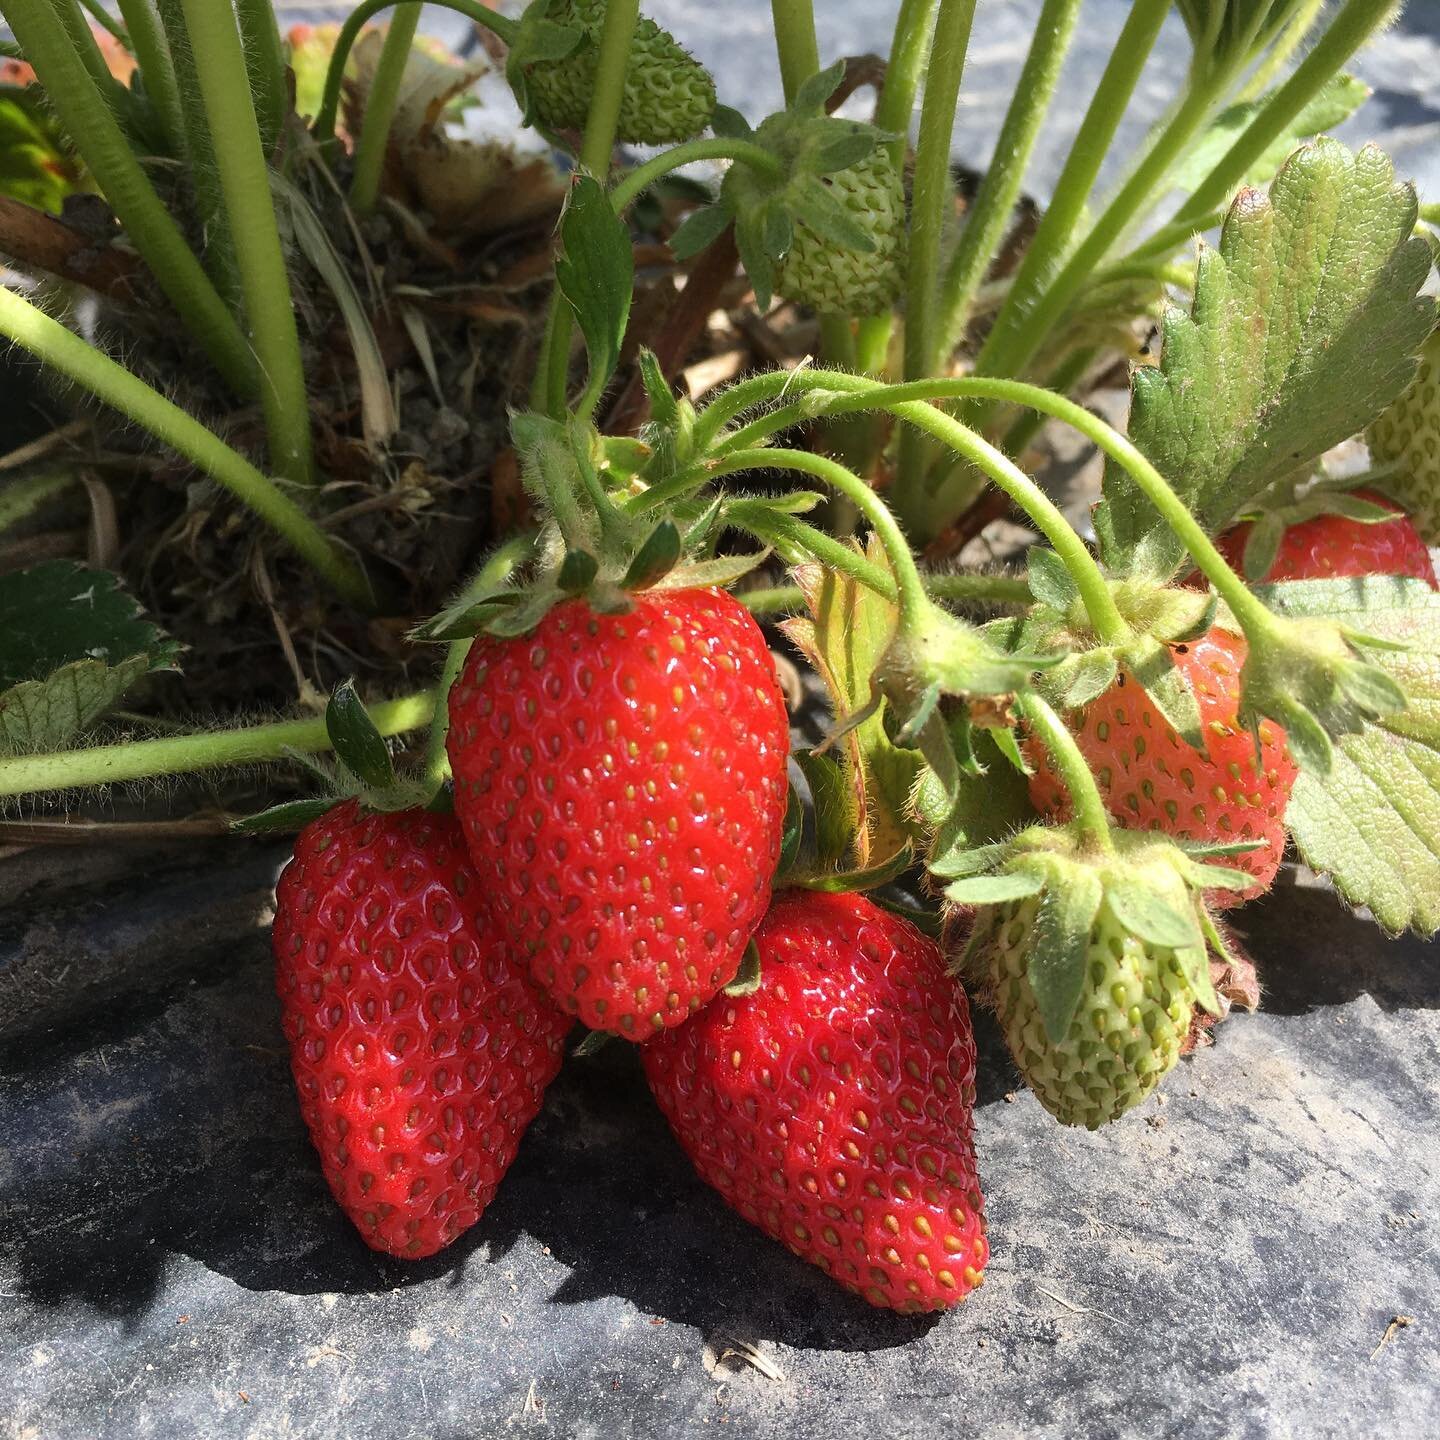 We have been radio silent for a while, but the farm is in full motion! Here are a few snapshots of what&rsquo;s growing. And yes, I took that photo of delicious ripe strawberries this morning! They will be available at the first @pembyfarmersmarket J